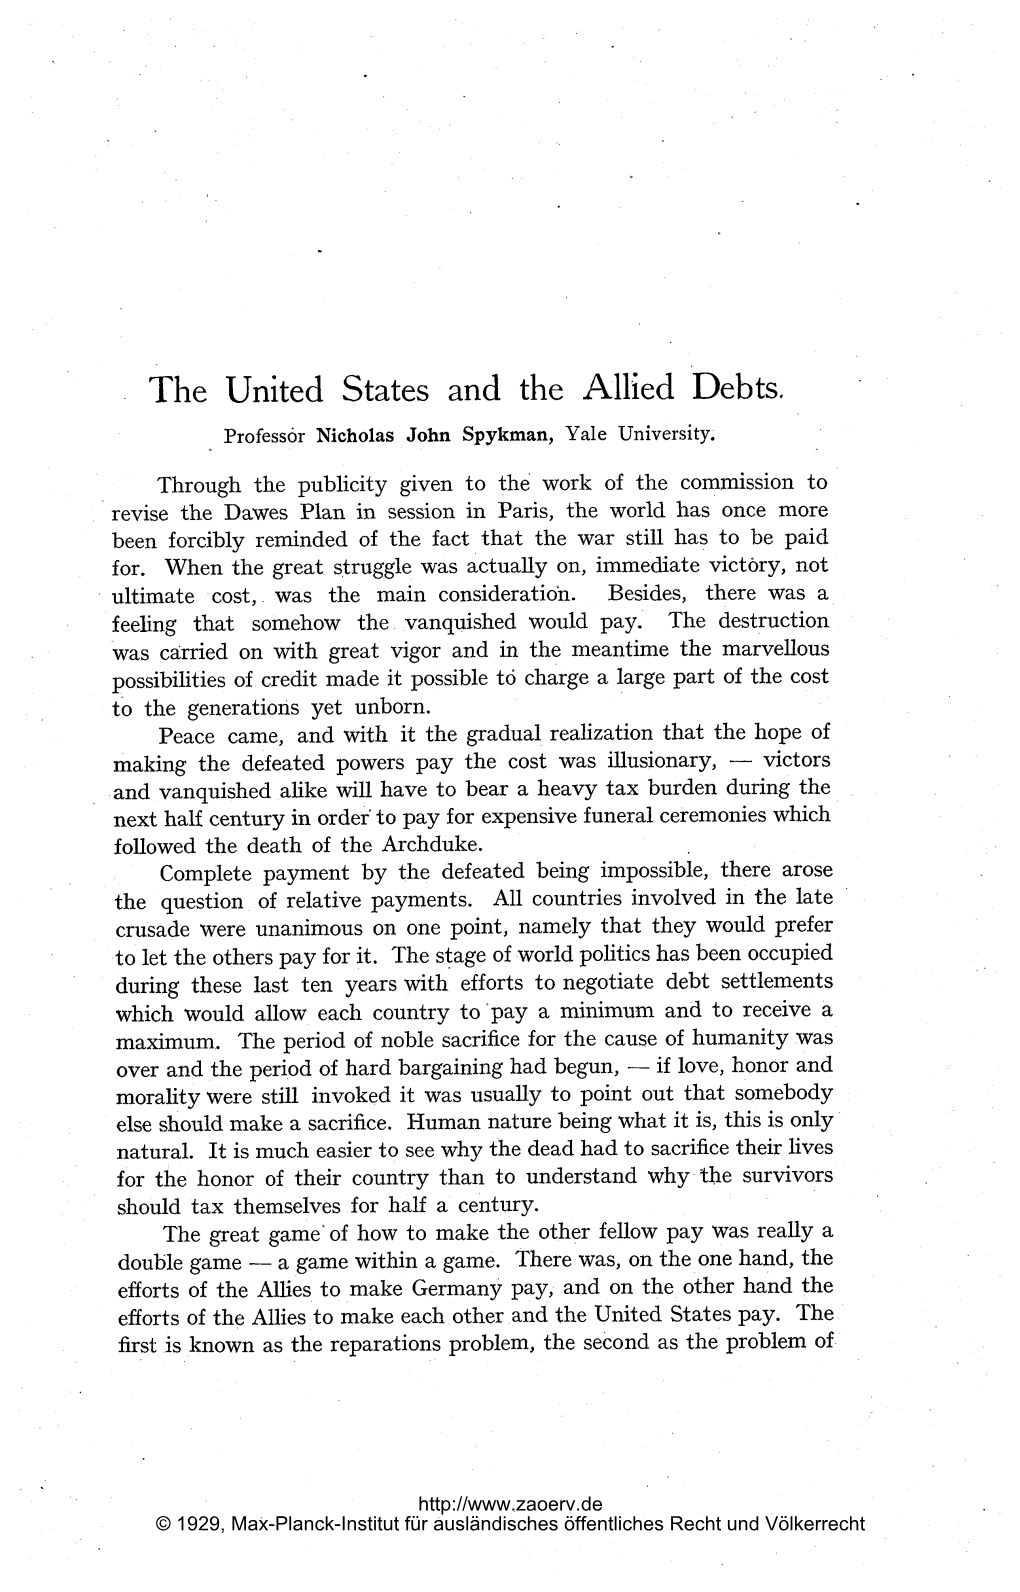 The United States and the Allied Debts